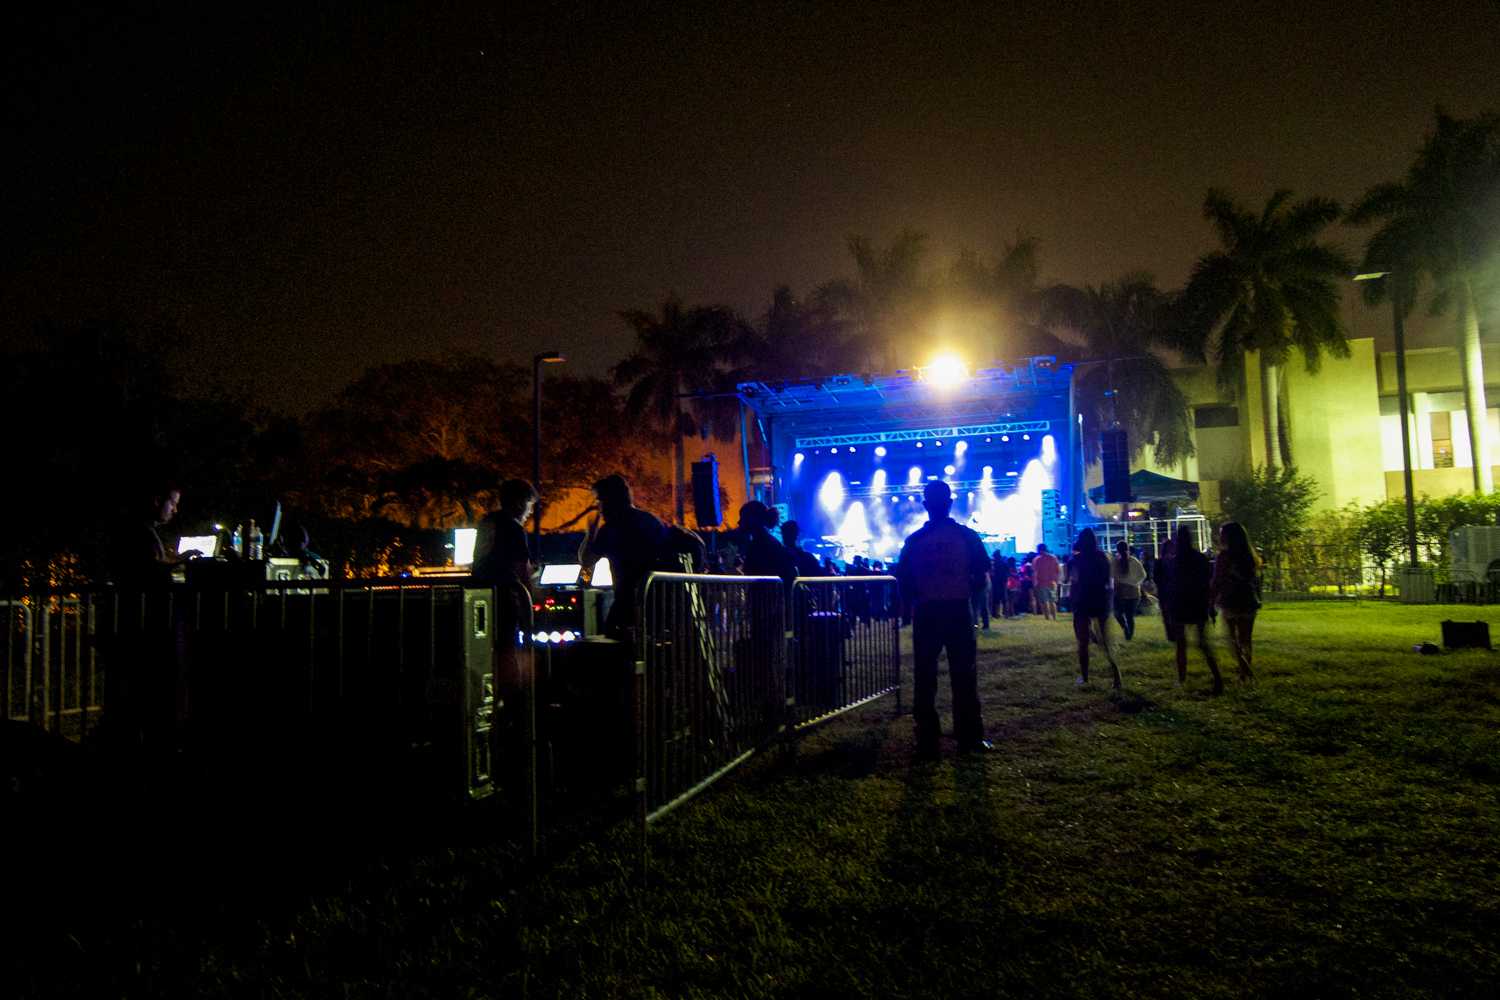 Owl Prowl concert featuring Jay Sean and T-Pain, Oct. 29, is about to start.